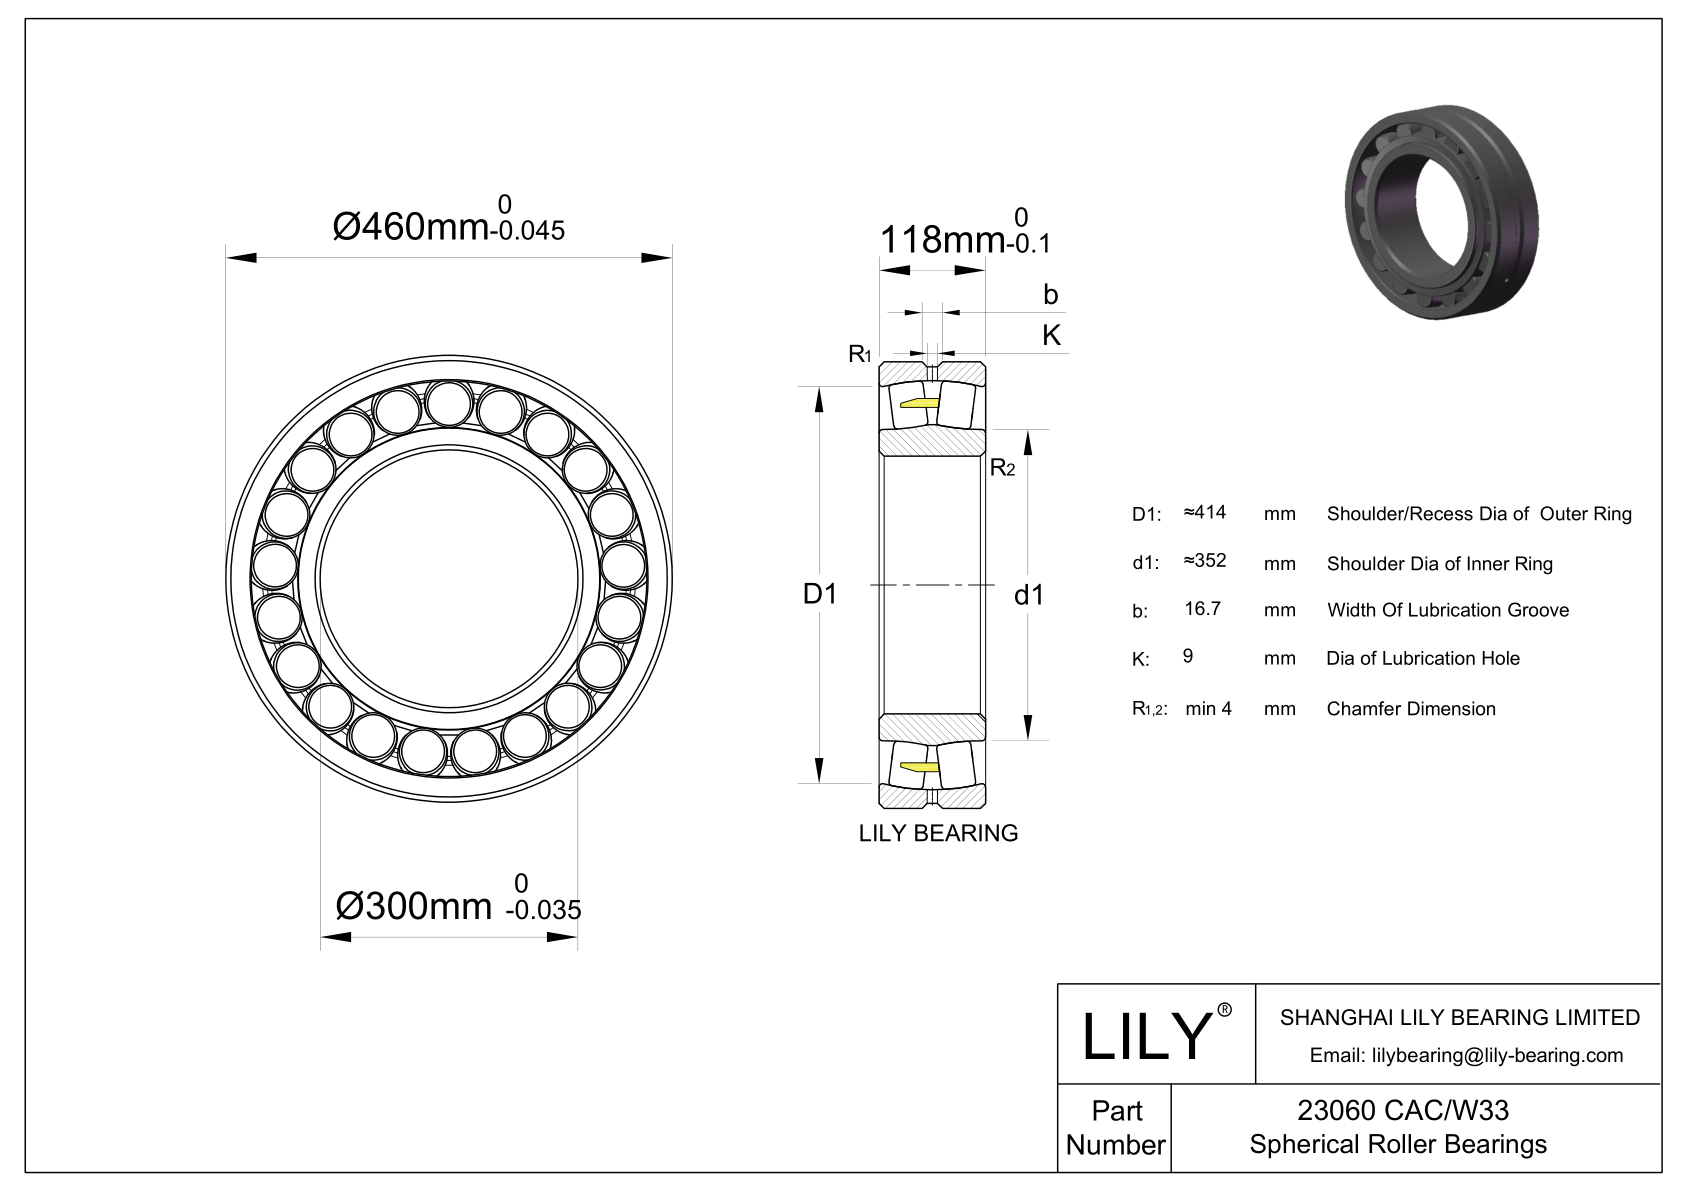 23060 CAC/W33 Double Row Spherical Roller Bearing cad drawing